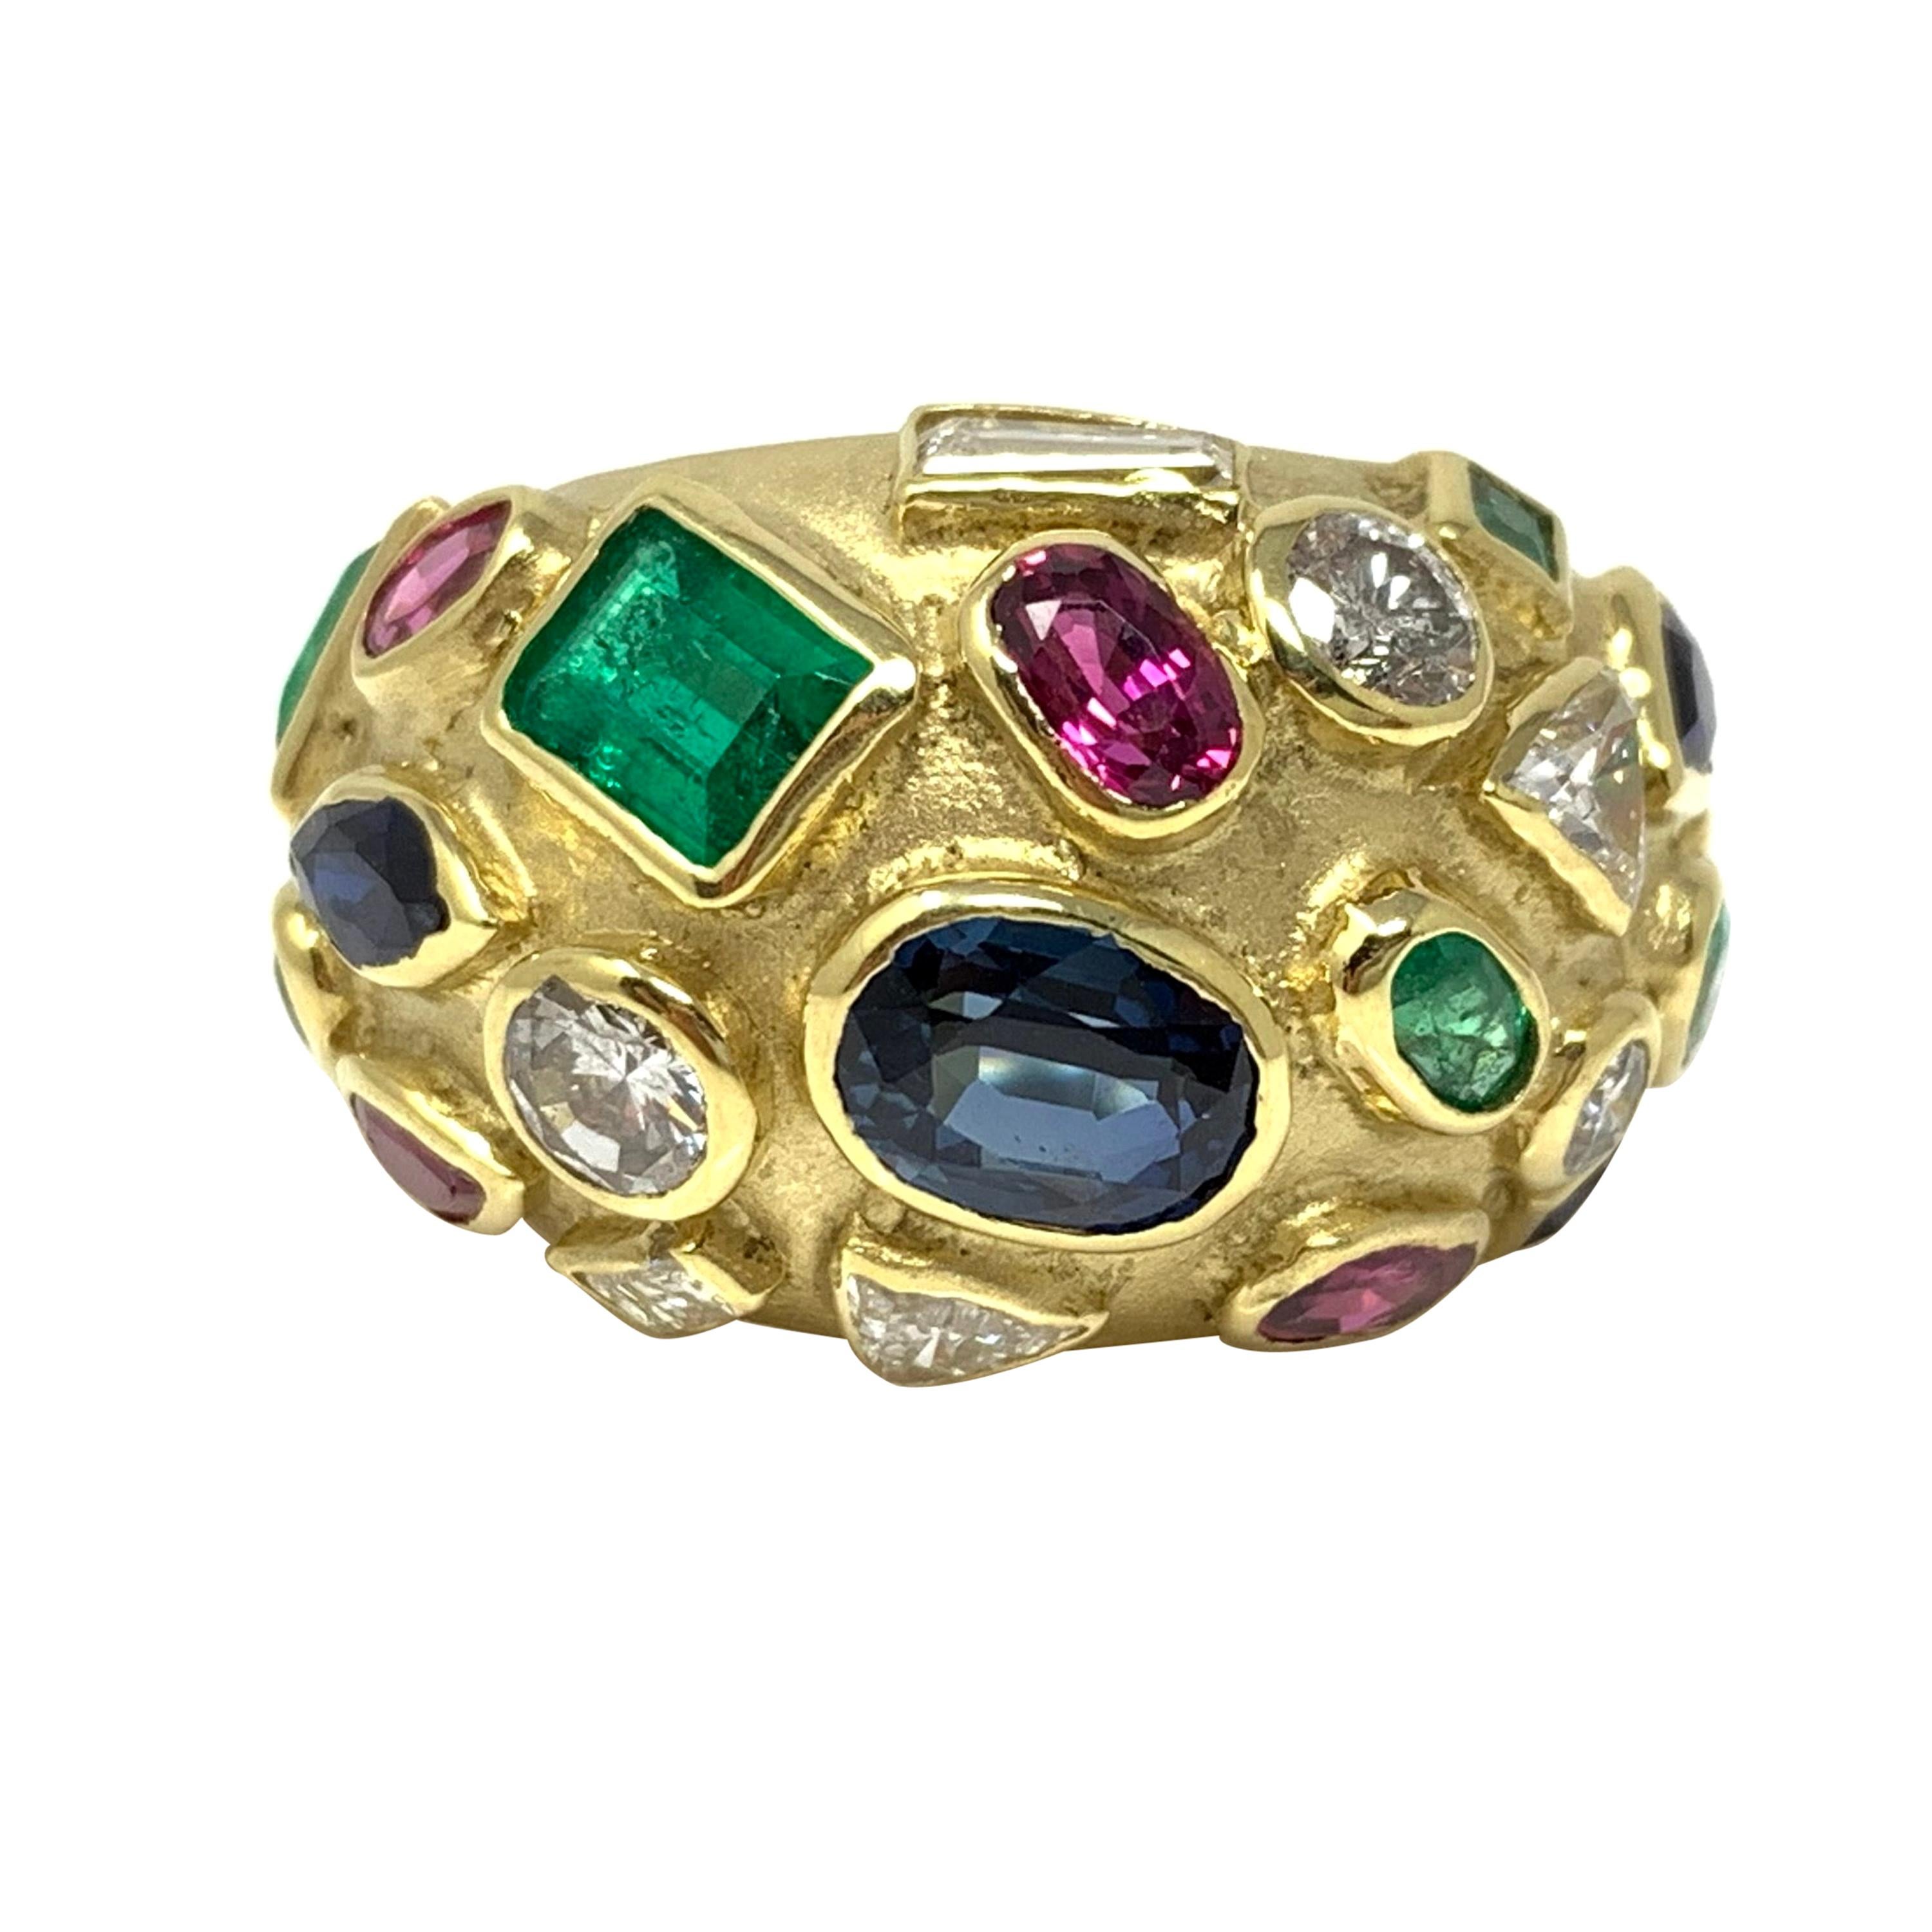 Diamond, Blue Sapphire, Emerald and Ruby Ring in 18 Karat Gold